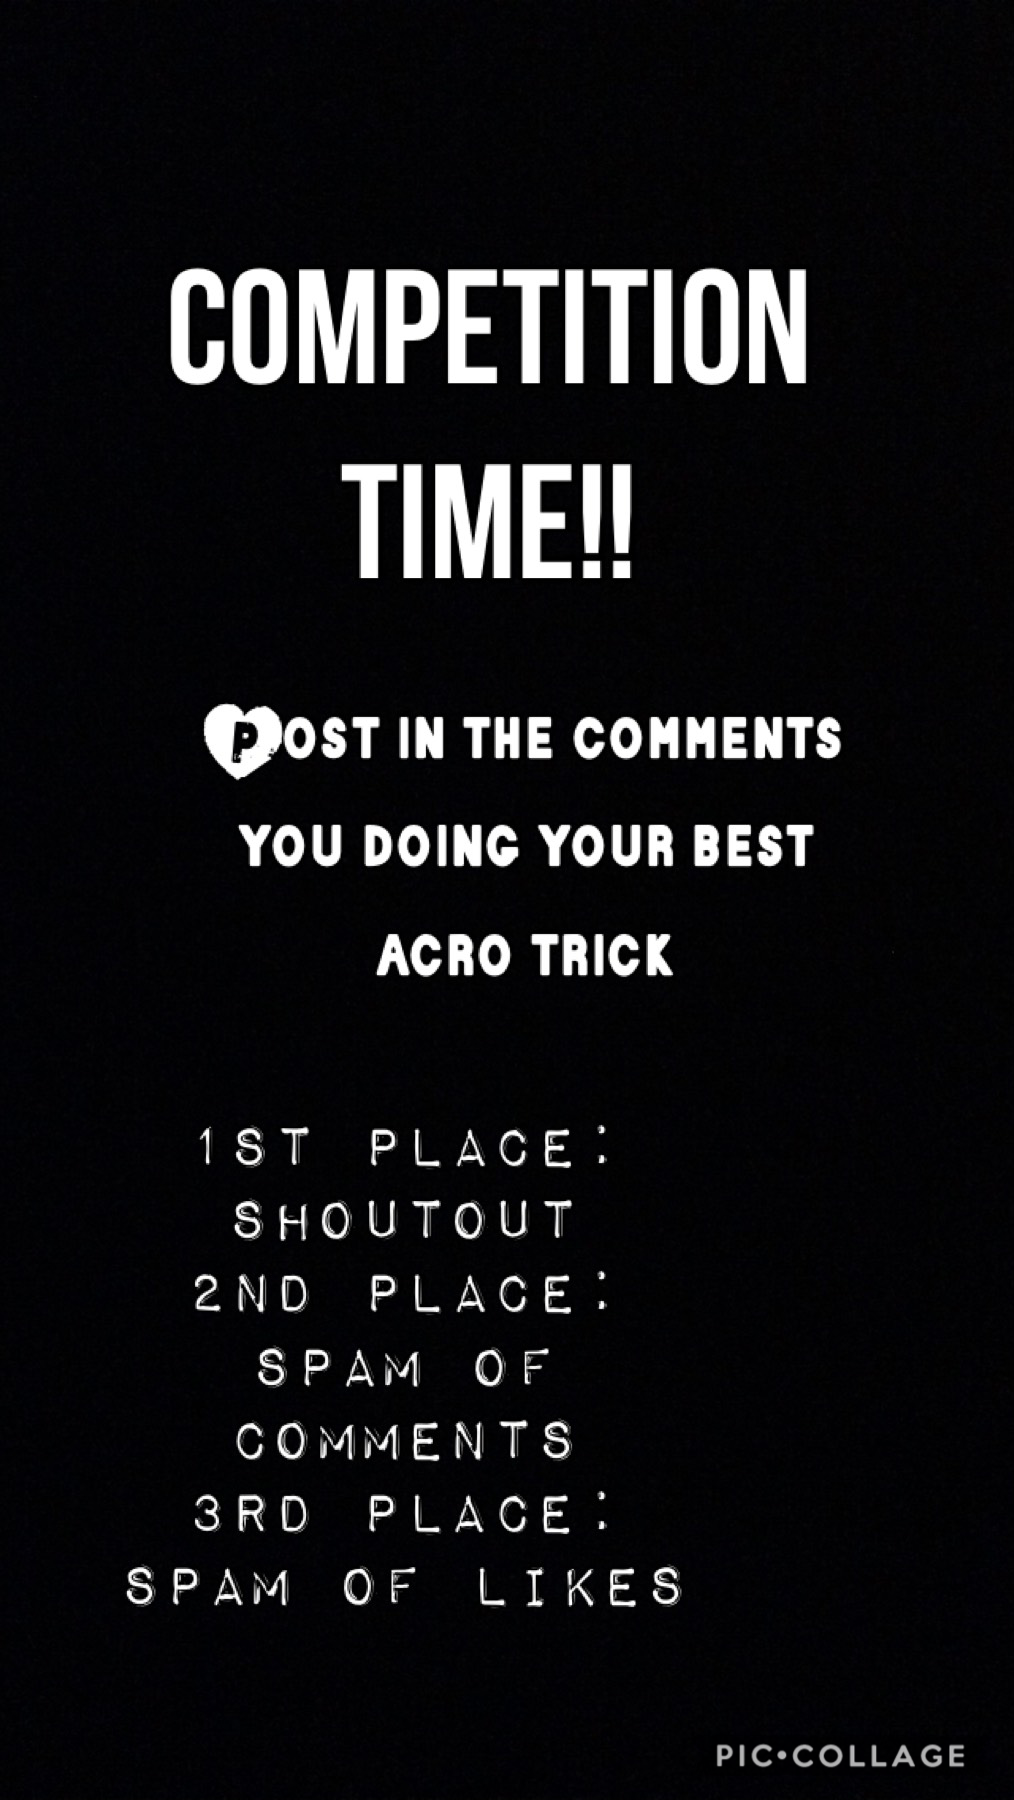 Post your photo of the acro trick in the comments please!

ENJOY😘❤️ love you all xx